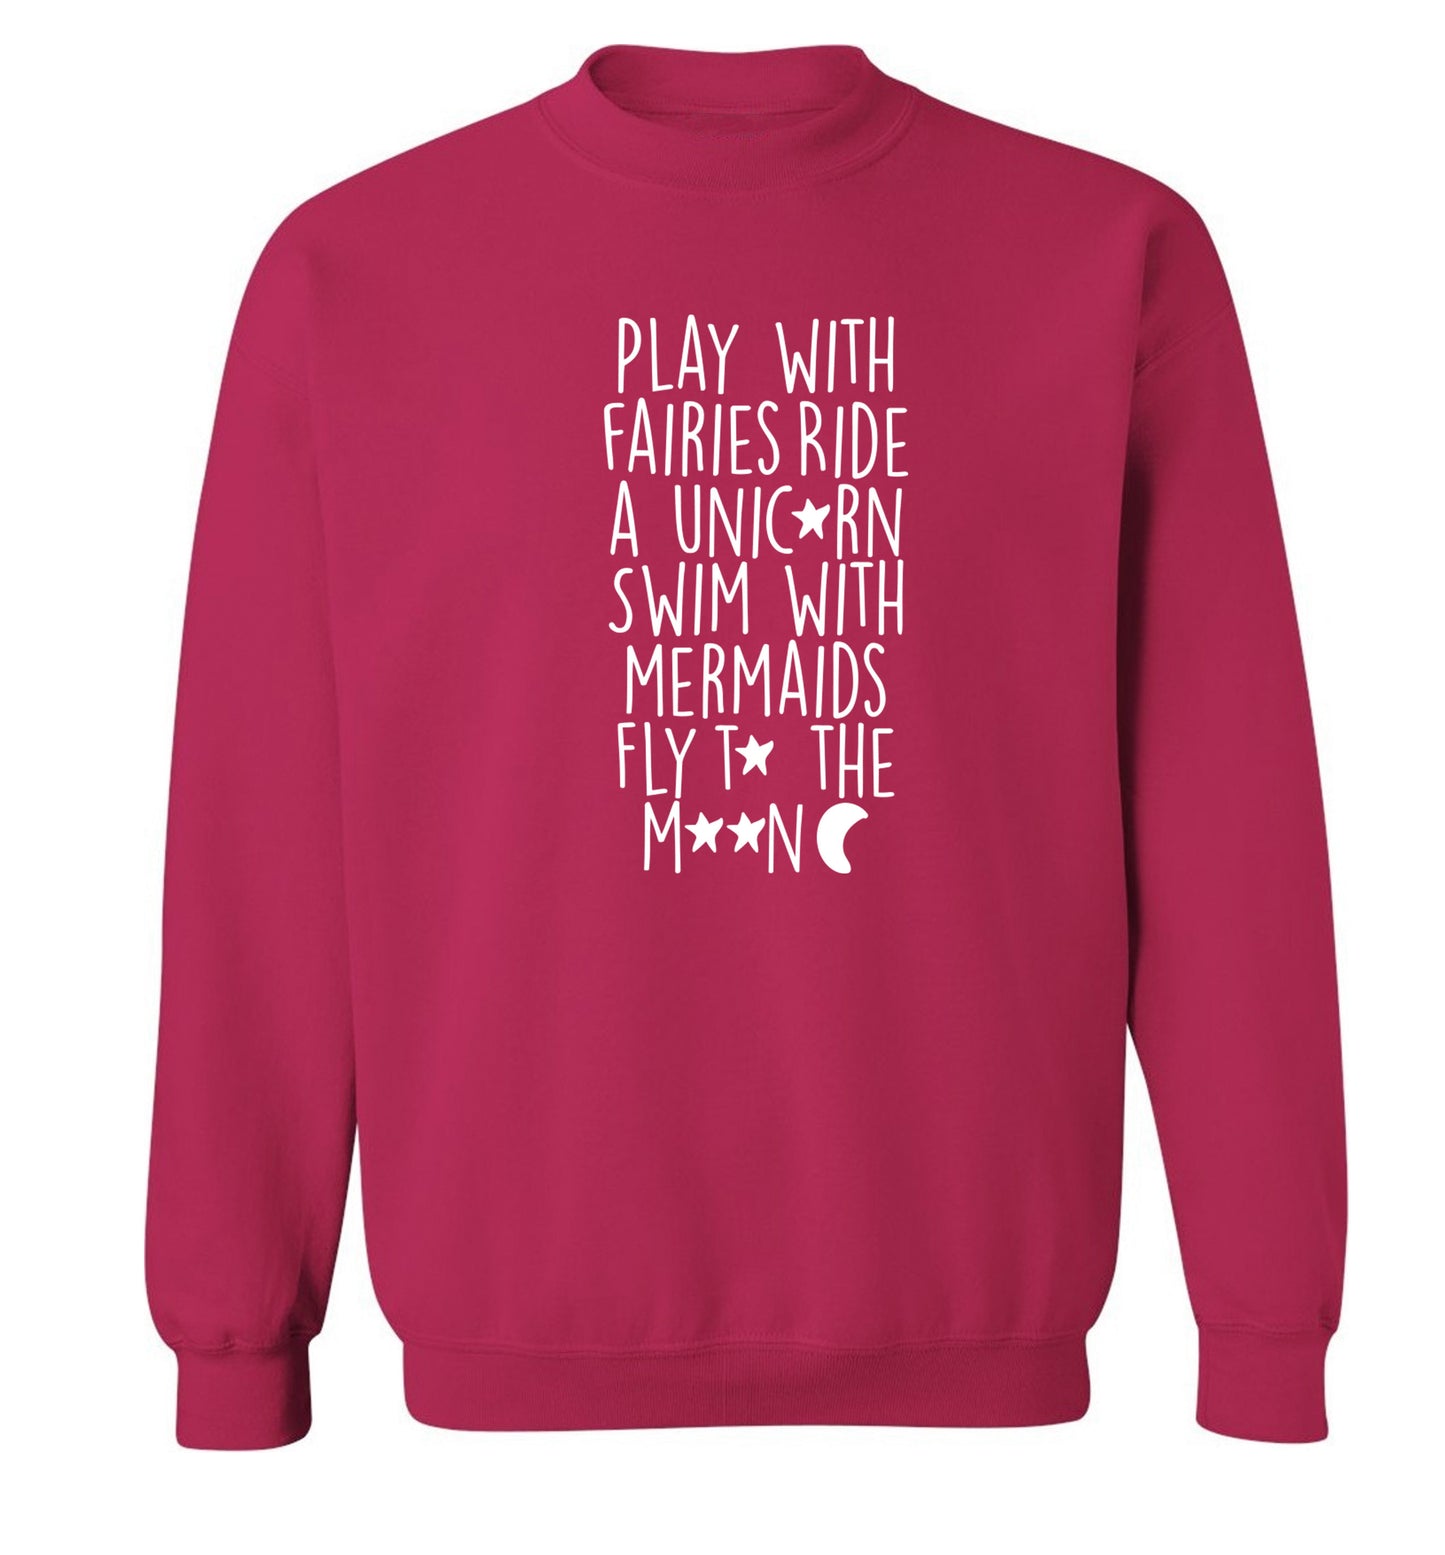 Play with fairies ride a unicorn swim with mermaids fly to the moon Adult's unisex pink Sweater 2XL